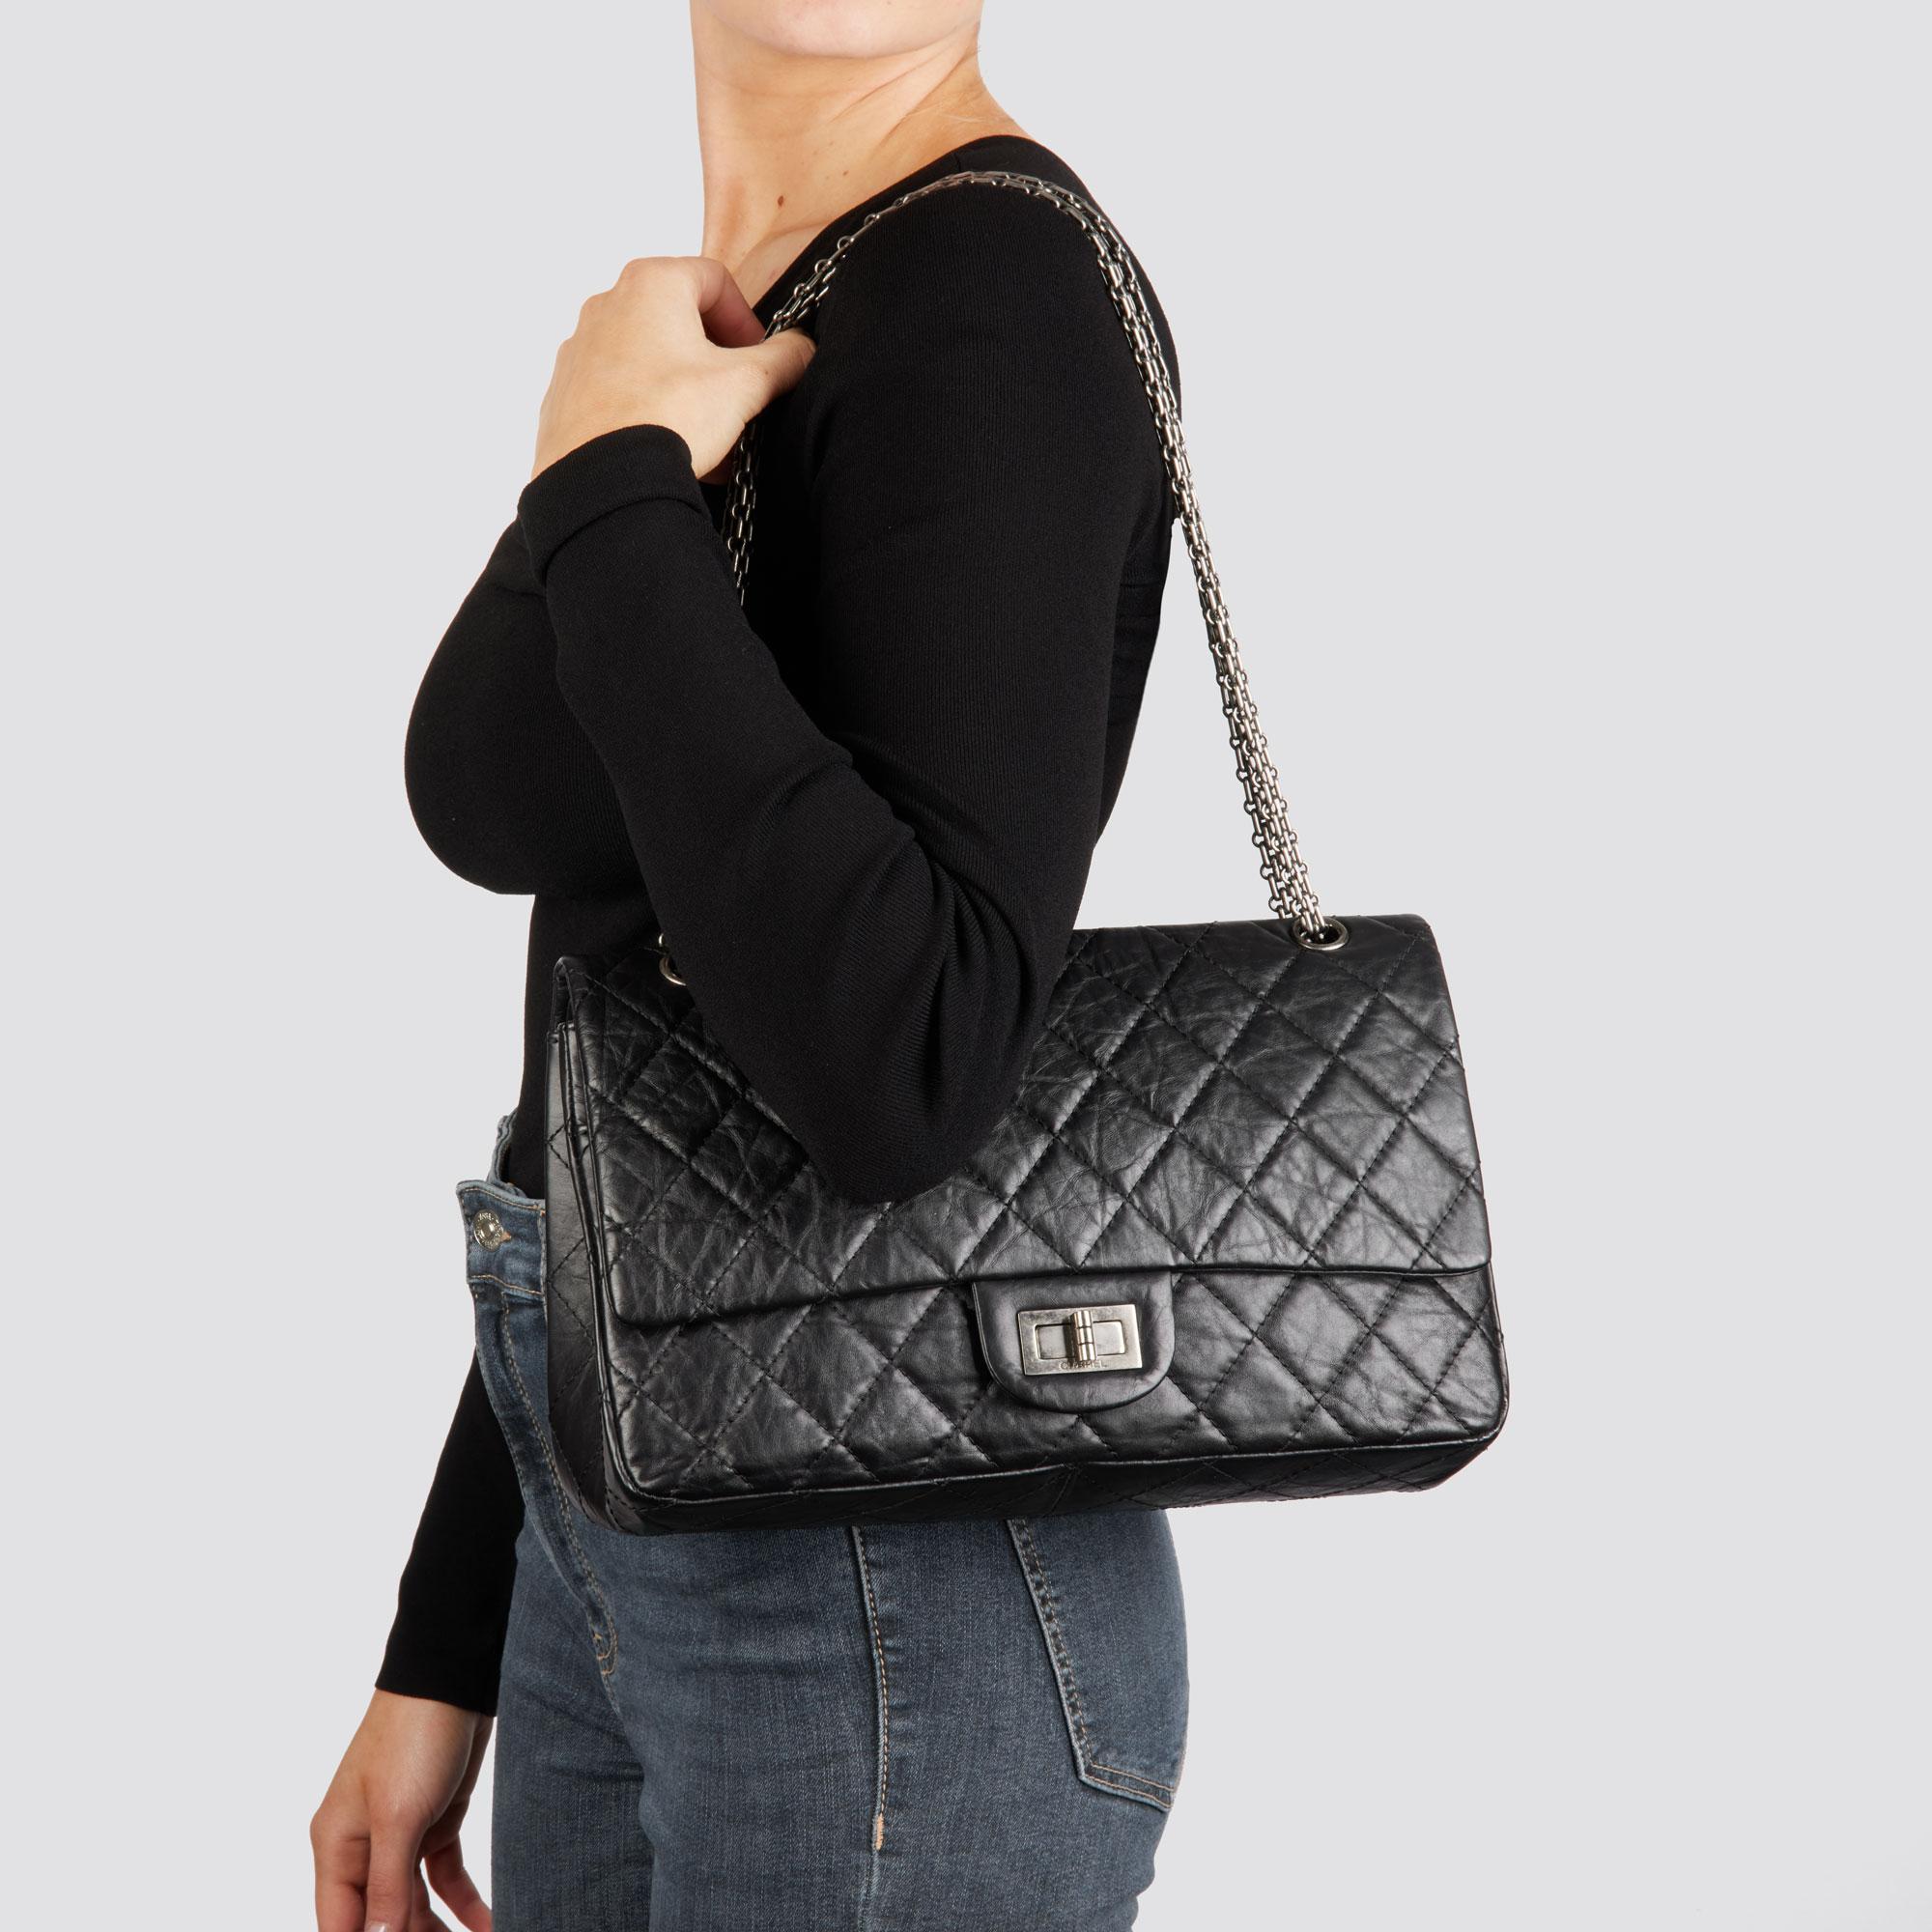 CHANEL Black Quilted Aged Calfskin leather 2.55 Reissue 227 Double Flap Bag 9